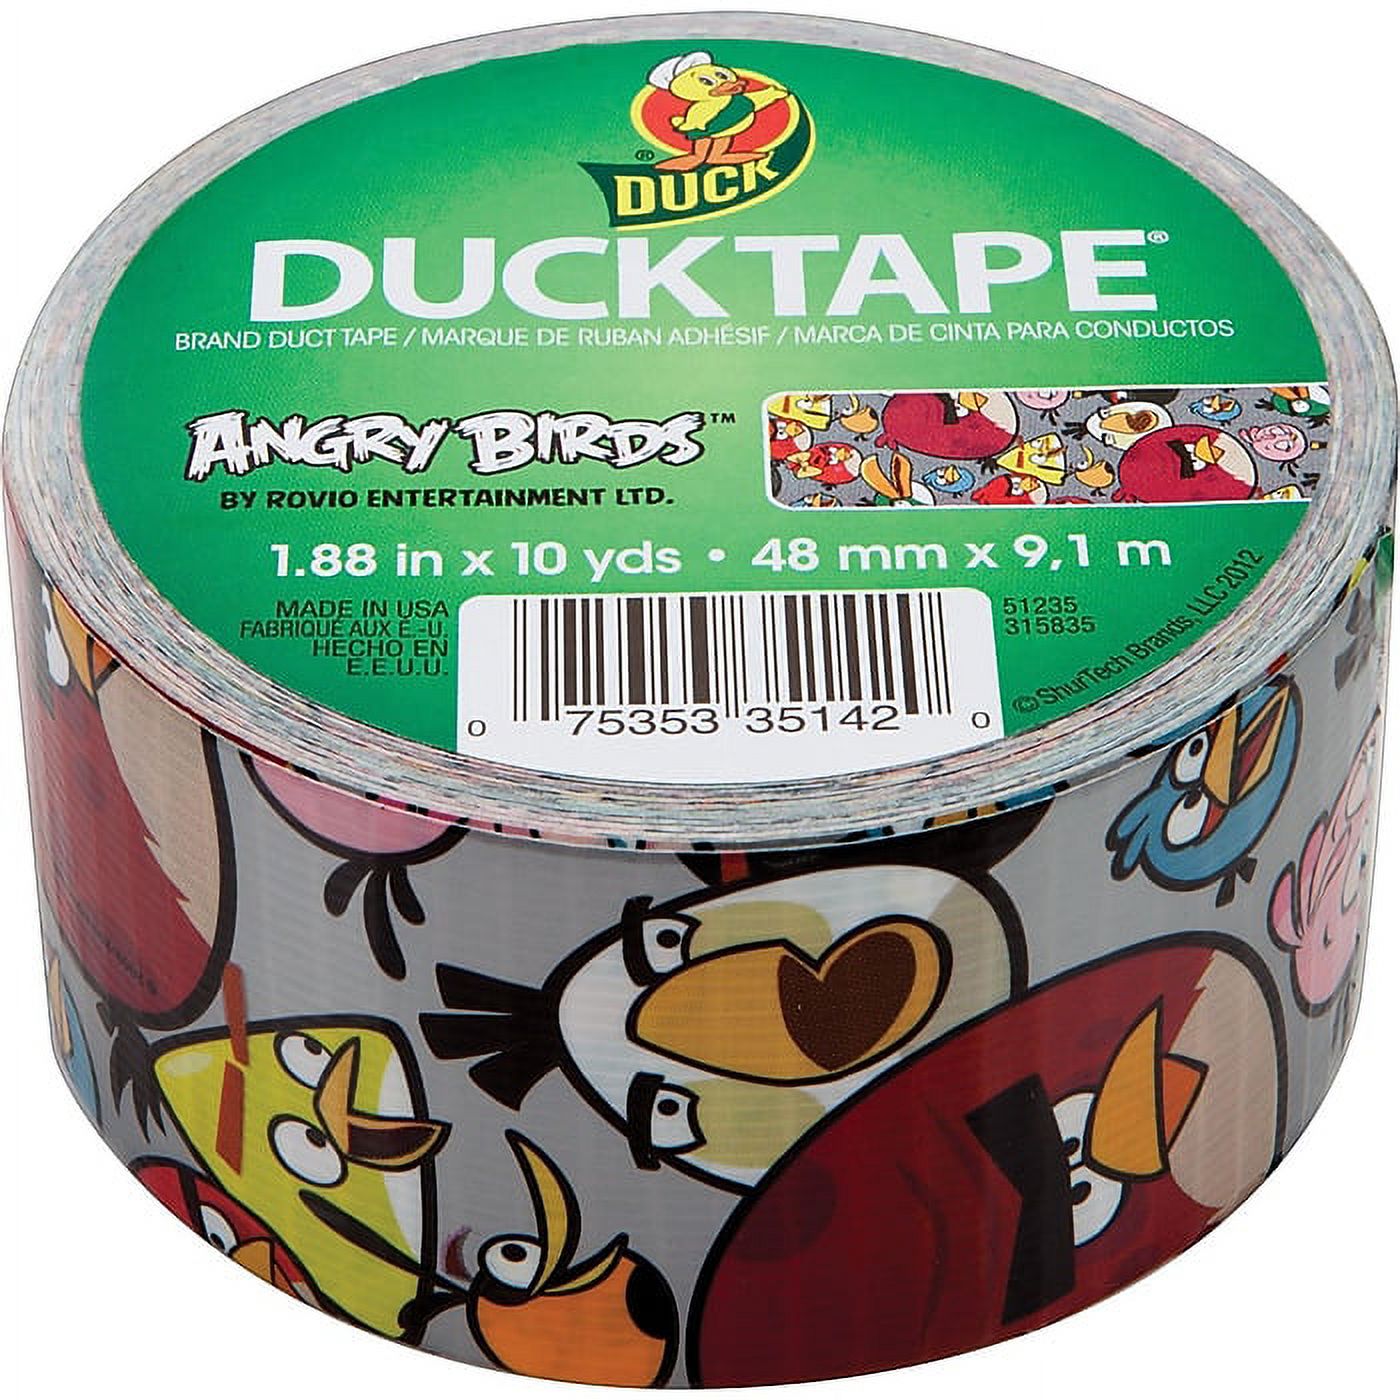 Duck Brand 281512 Angry Birds Printed Duct Tape, 1.88 Inches x 10 Yards, Single Roll - image 1 of 4